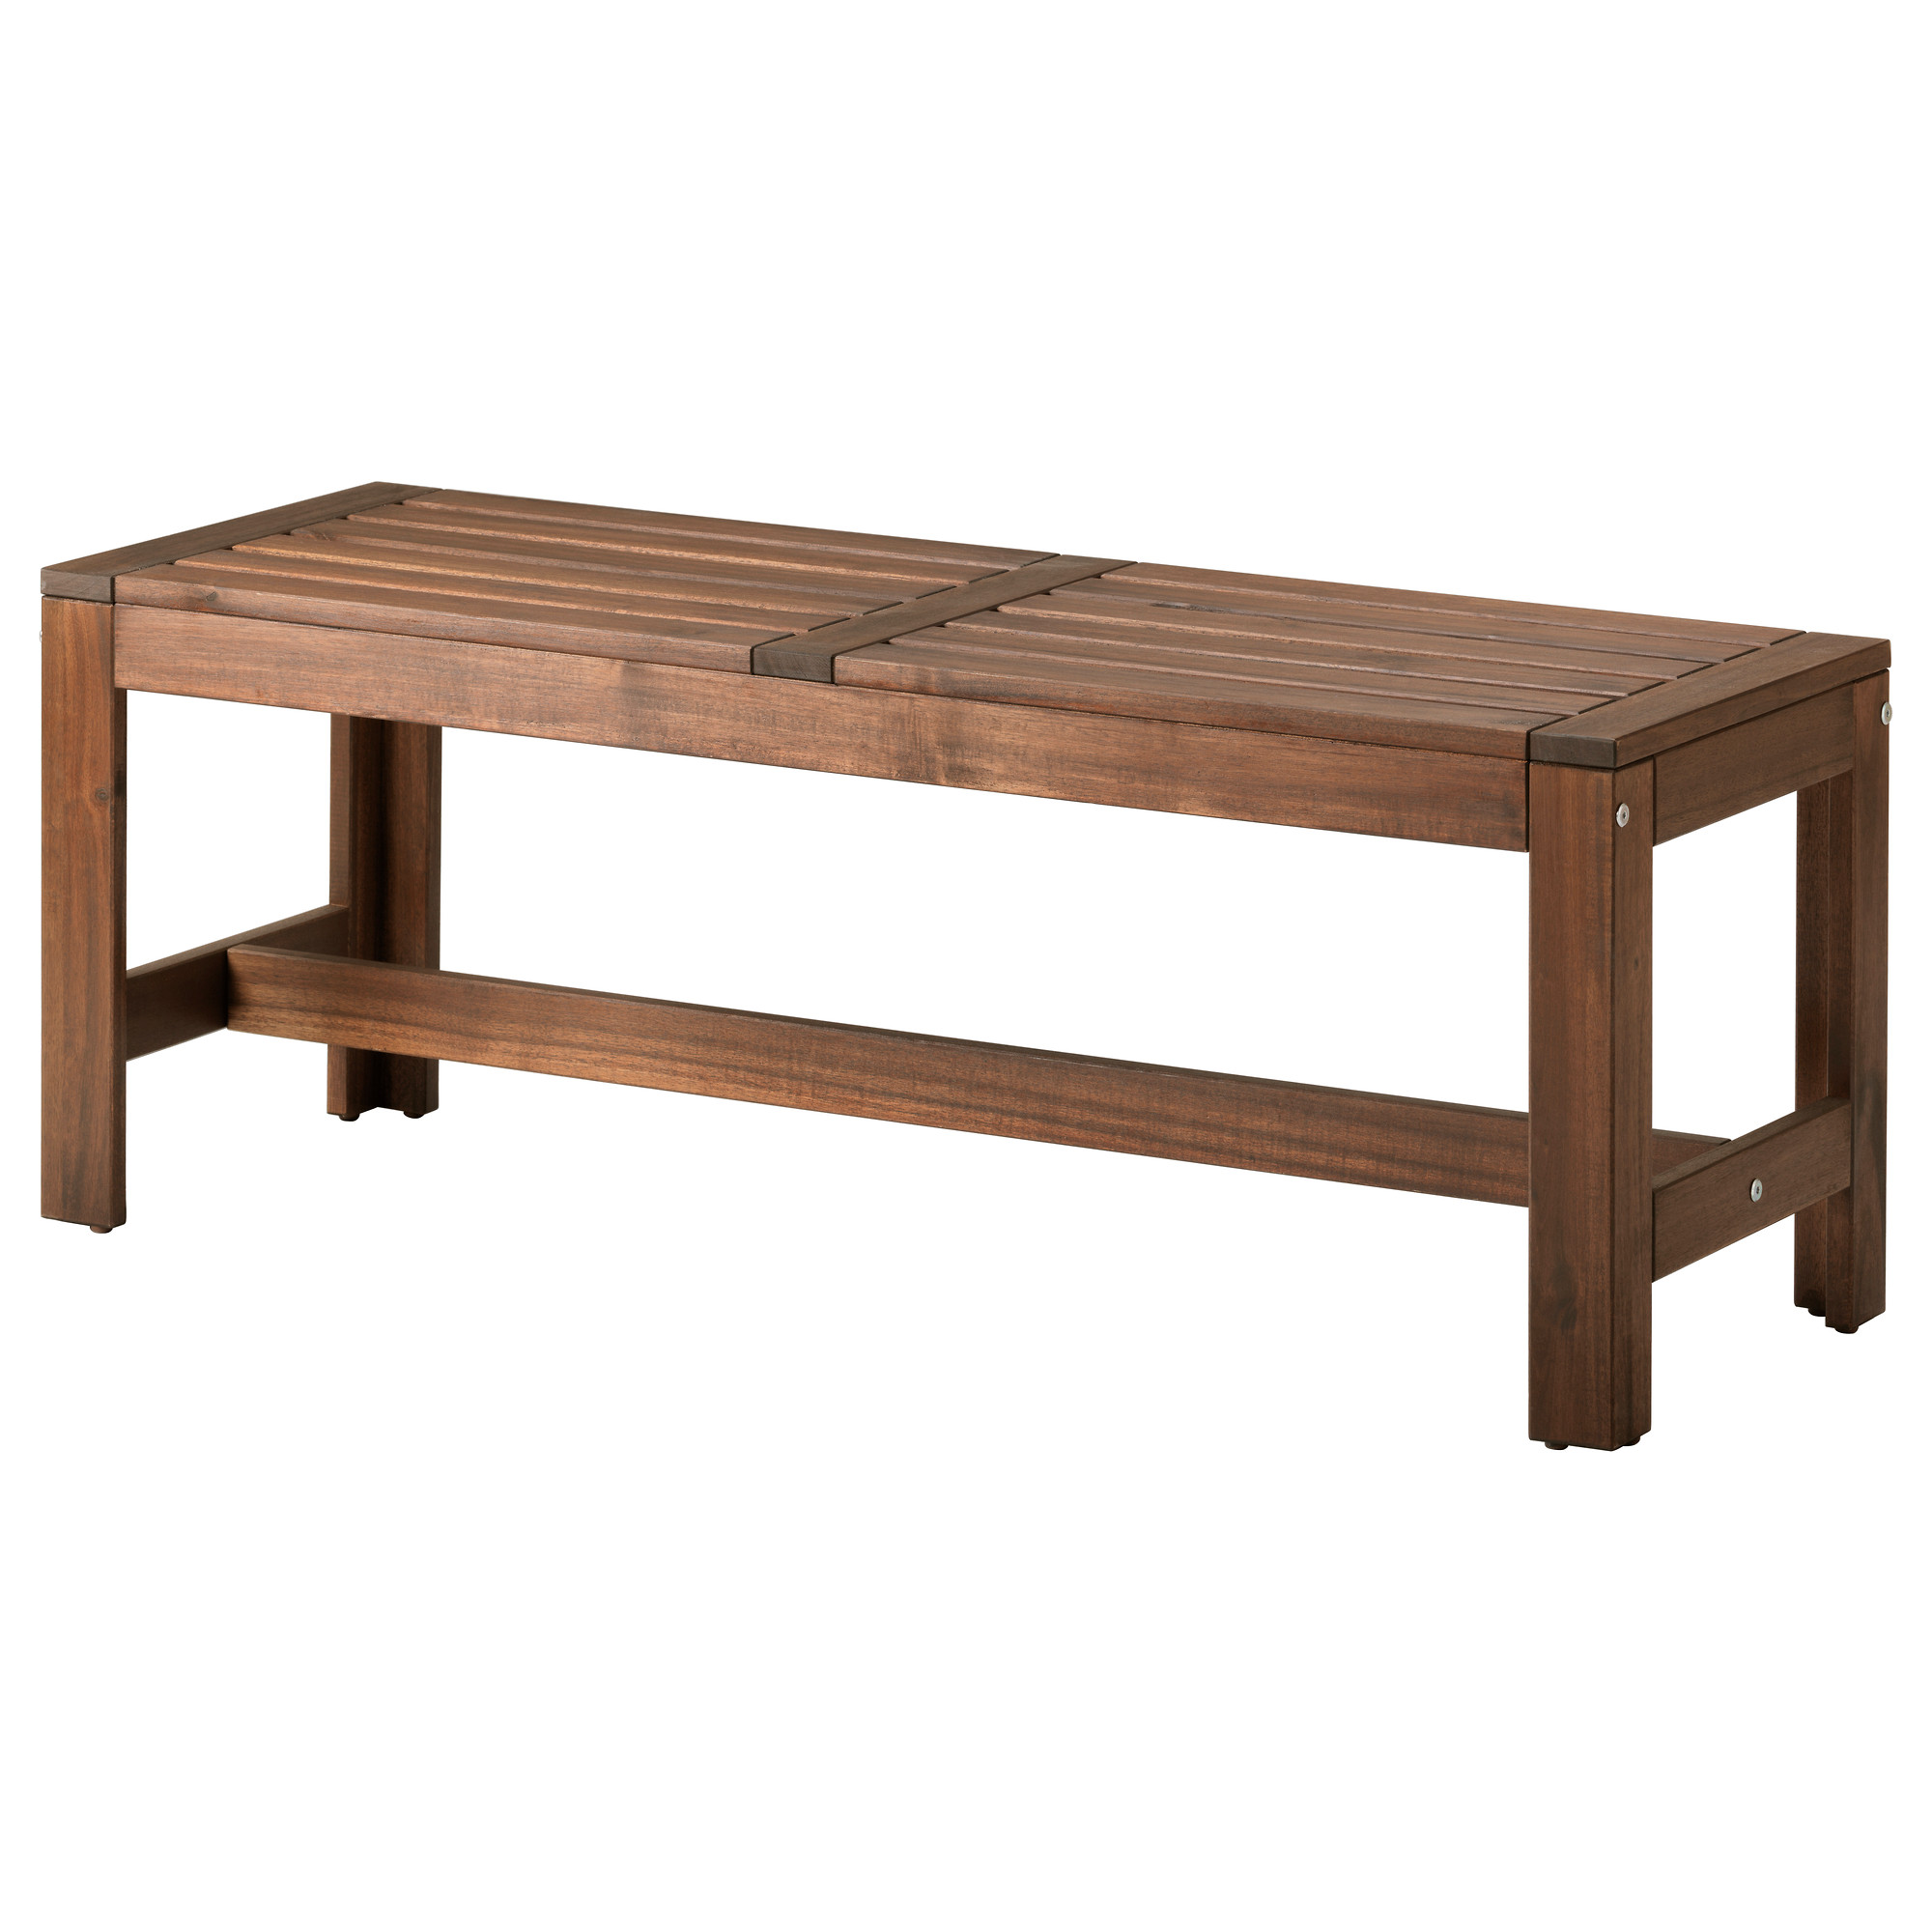 Top 77 Exceptional Outdoor Benches Brown Stained Cm Ikea Comfortable ...